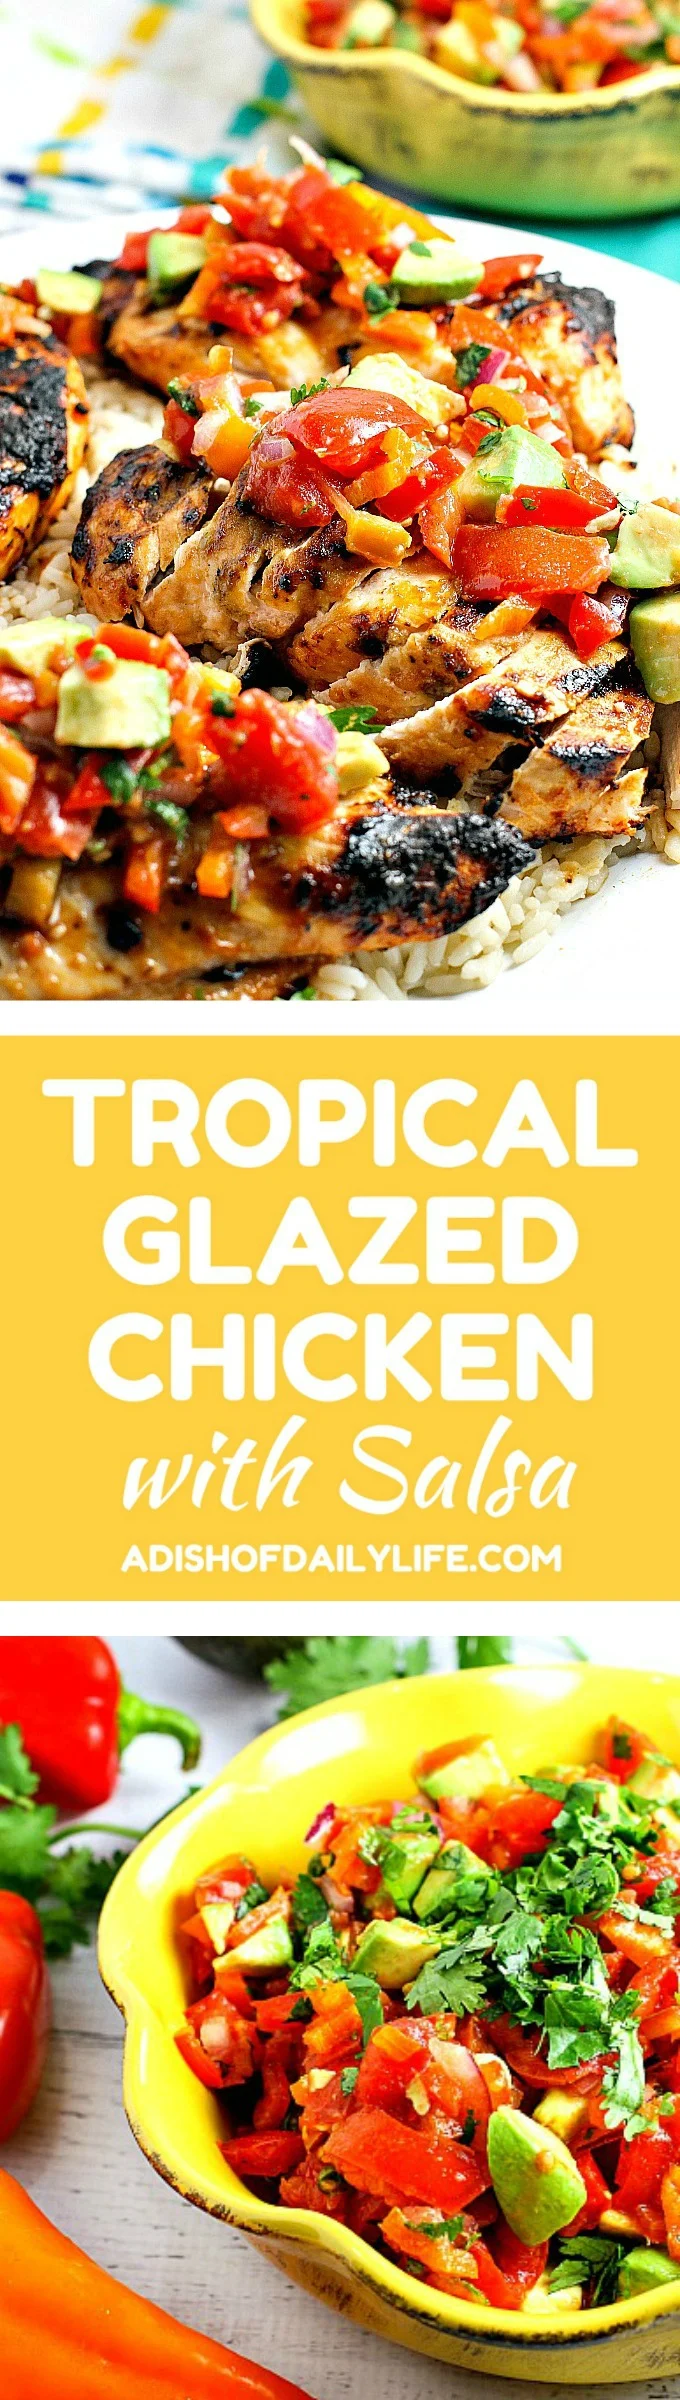 Fast, easy, delicious and healthy, this Tropical Glazed Chicken topped with salsa will make you feel like you're on an island vacation during dinner time! Only 30 minutes to make this recipe (not including the time to marinate)!